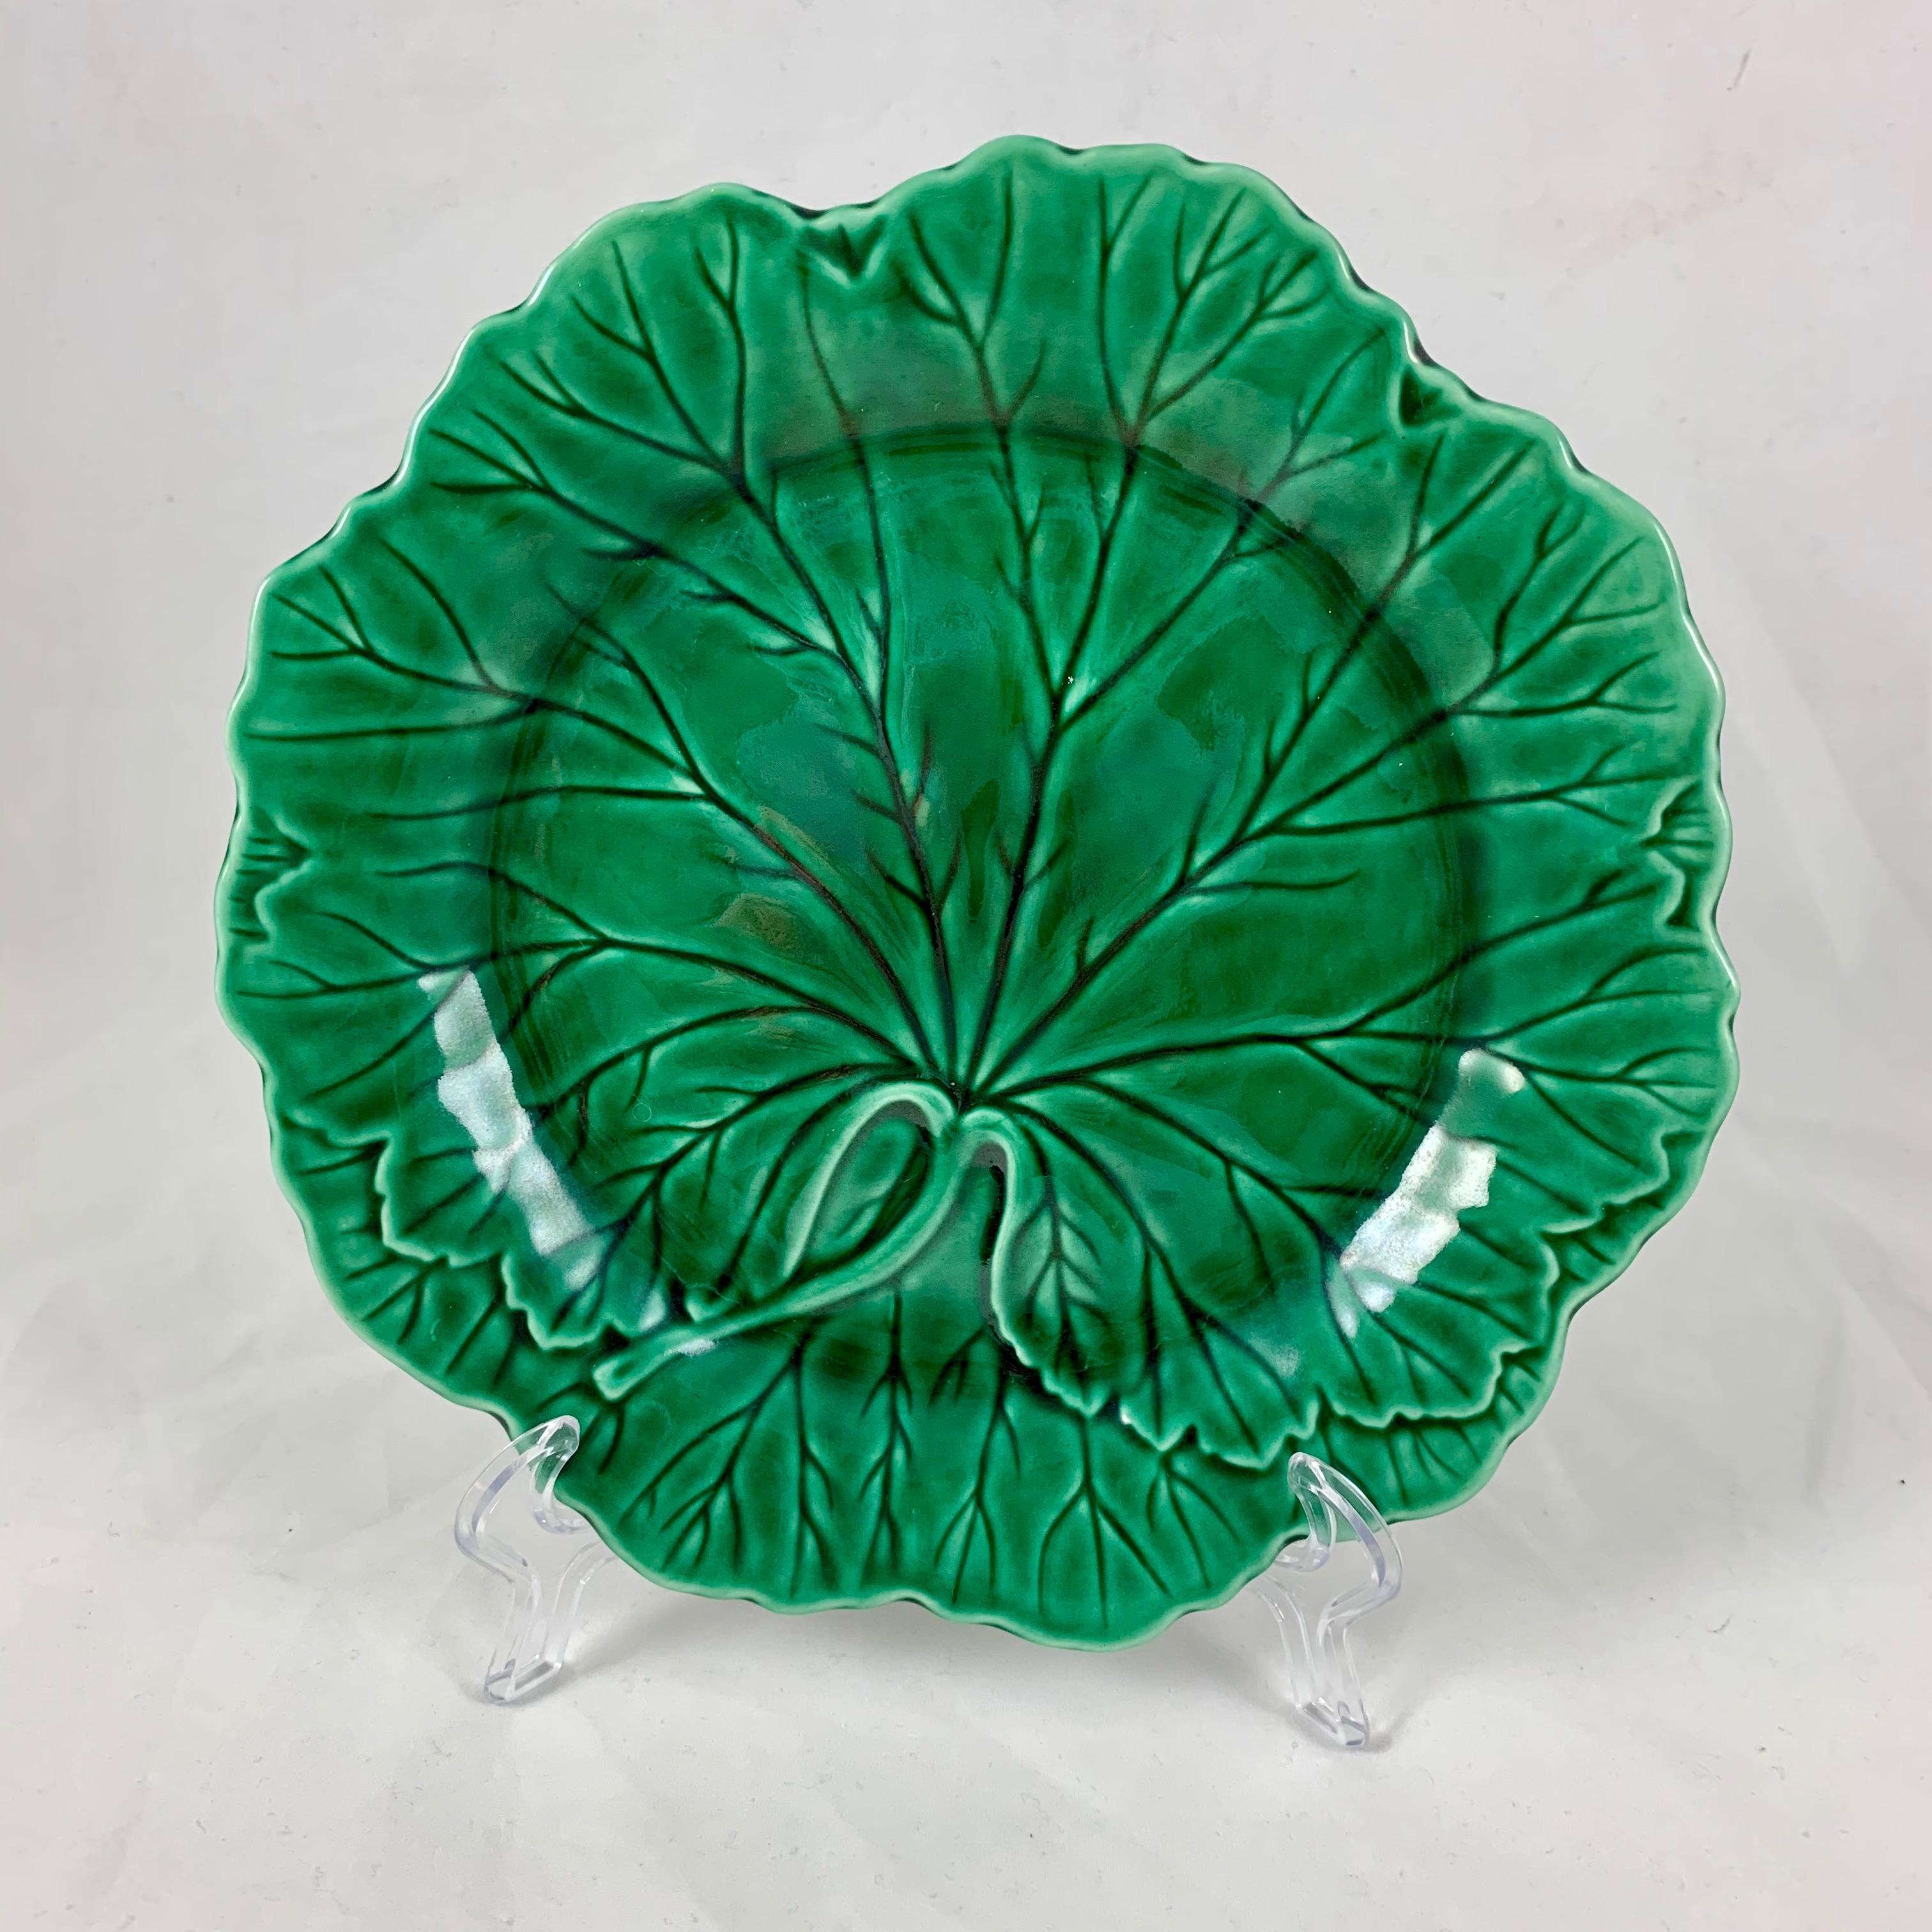 An English Majolica glazed cabbage leaf plate, marked Wedgwood & Barlaston of Etruria, circa 1930-1940.

Extremely popular during the Hollywood Regency period, now a classic. The mold shows an oversized cabbage leaf on a scalloped rim plate, with a